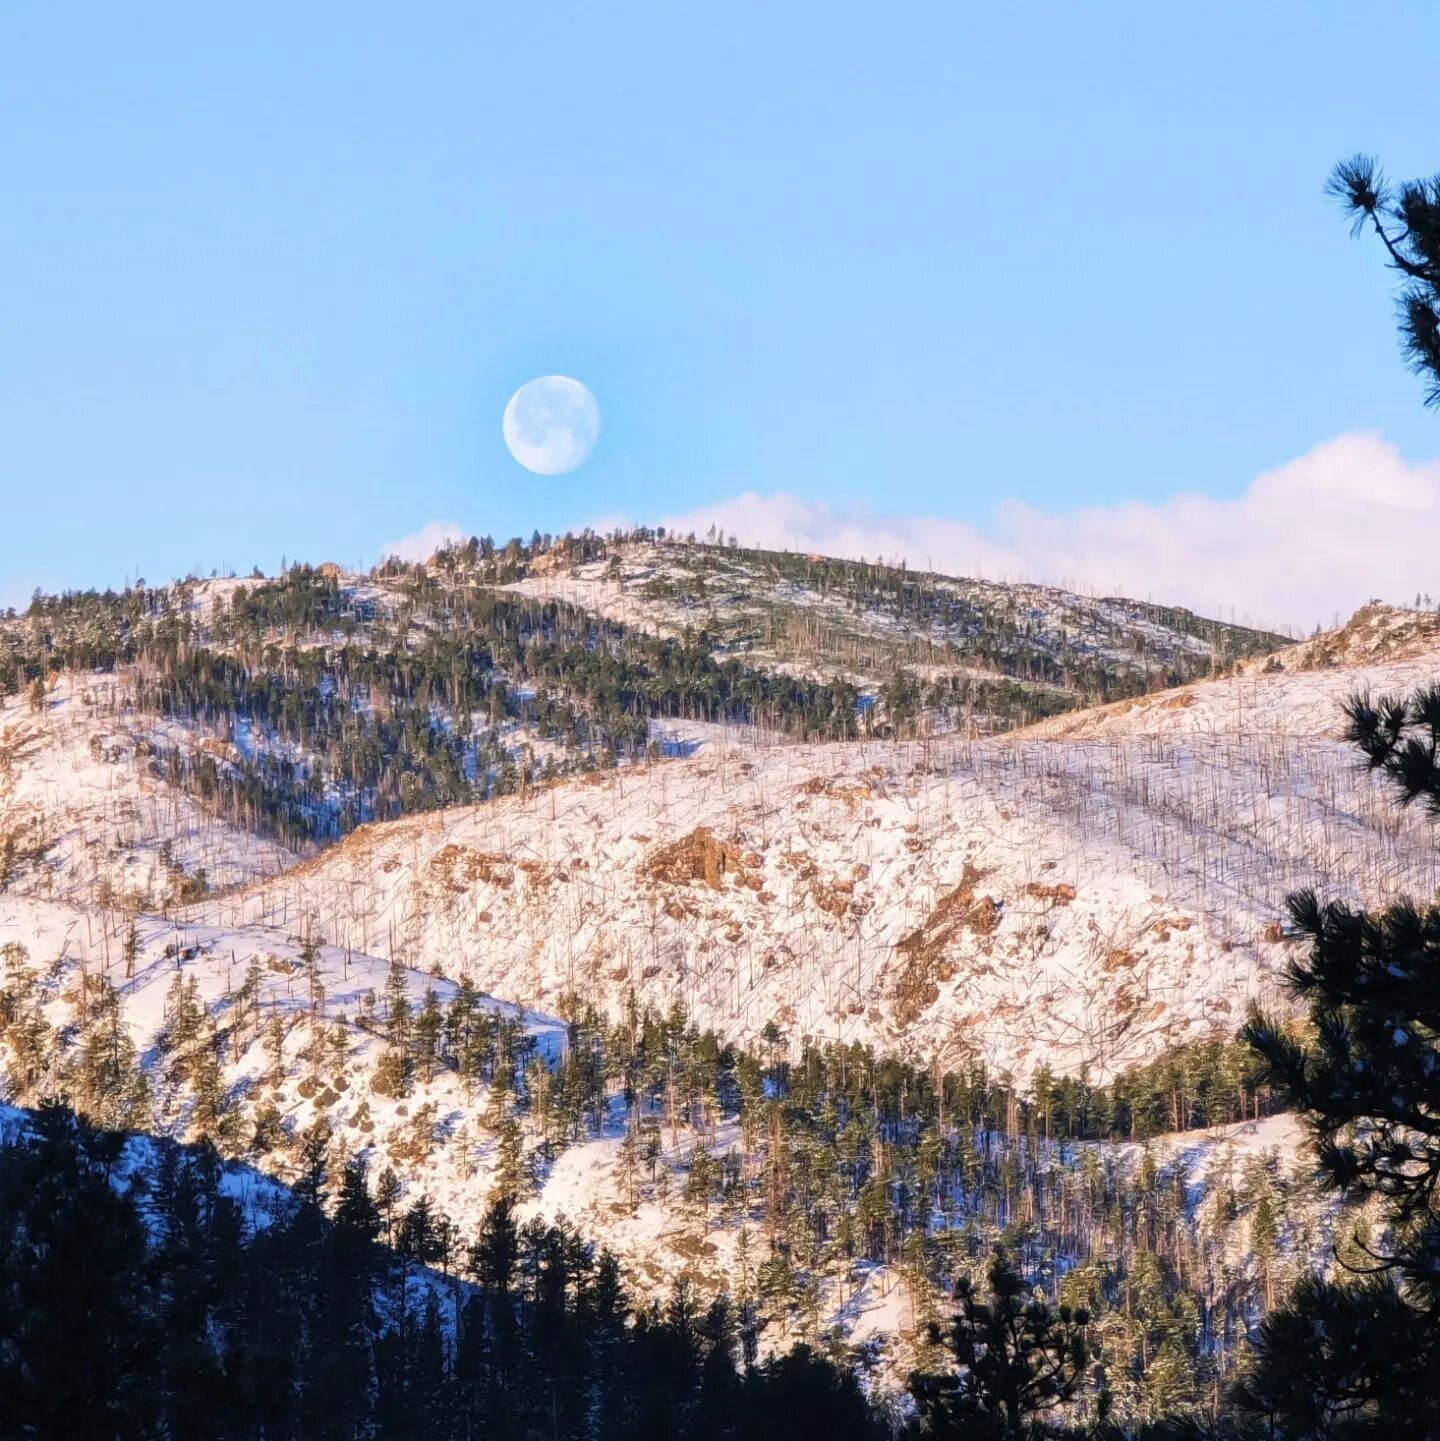 Another moon morning here in our wilderness! Hail and WELCOME moon! #moonset #fullmoon #moonlover #mountainlivingamongfairies